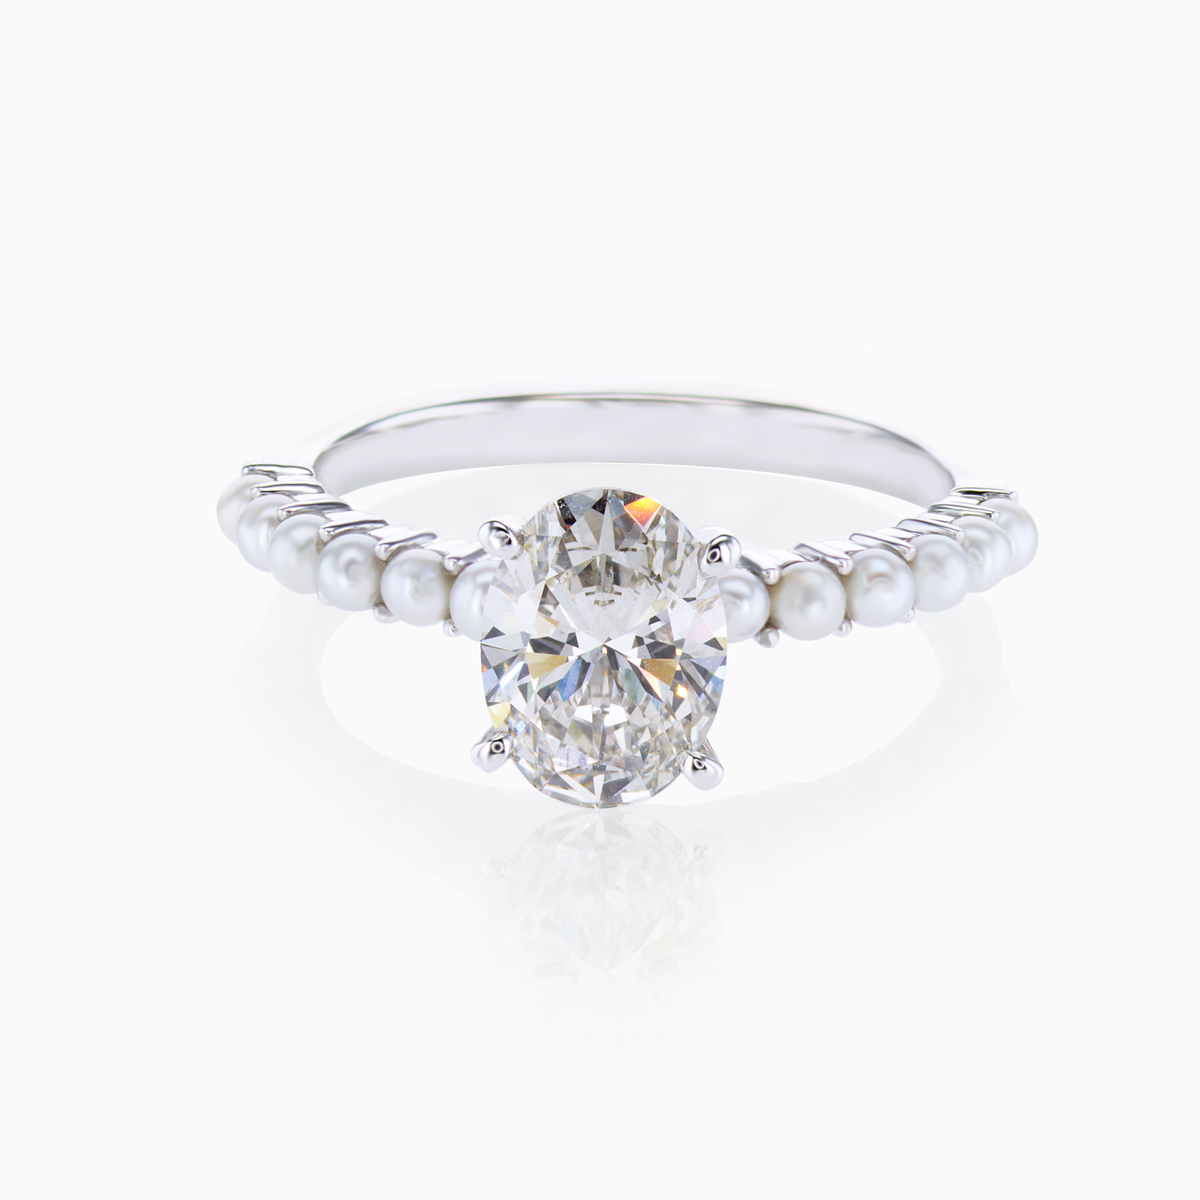 1.44ct Lab-Grown Diamond Engagement Ring with Elegant Pearl Accents